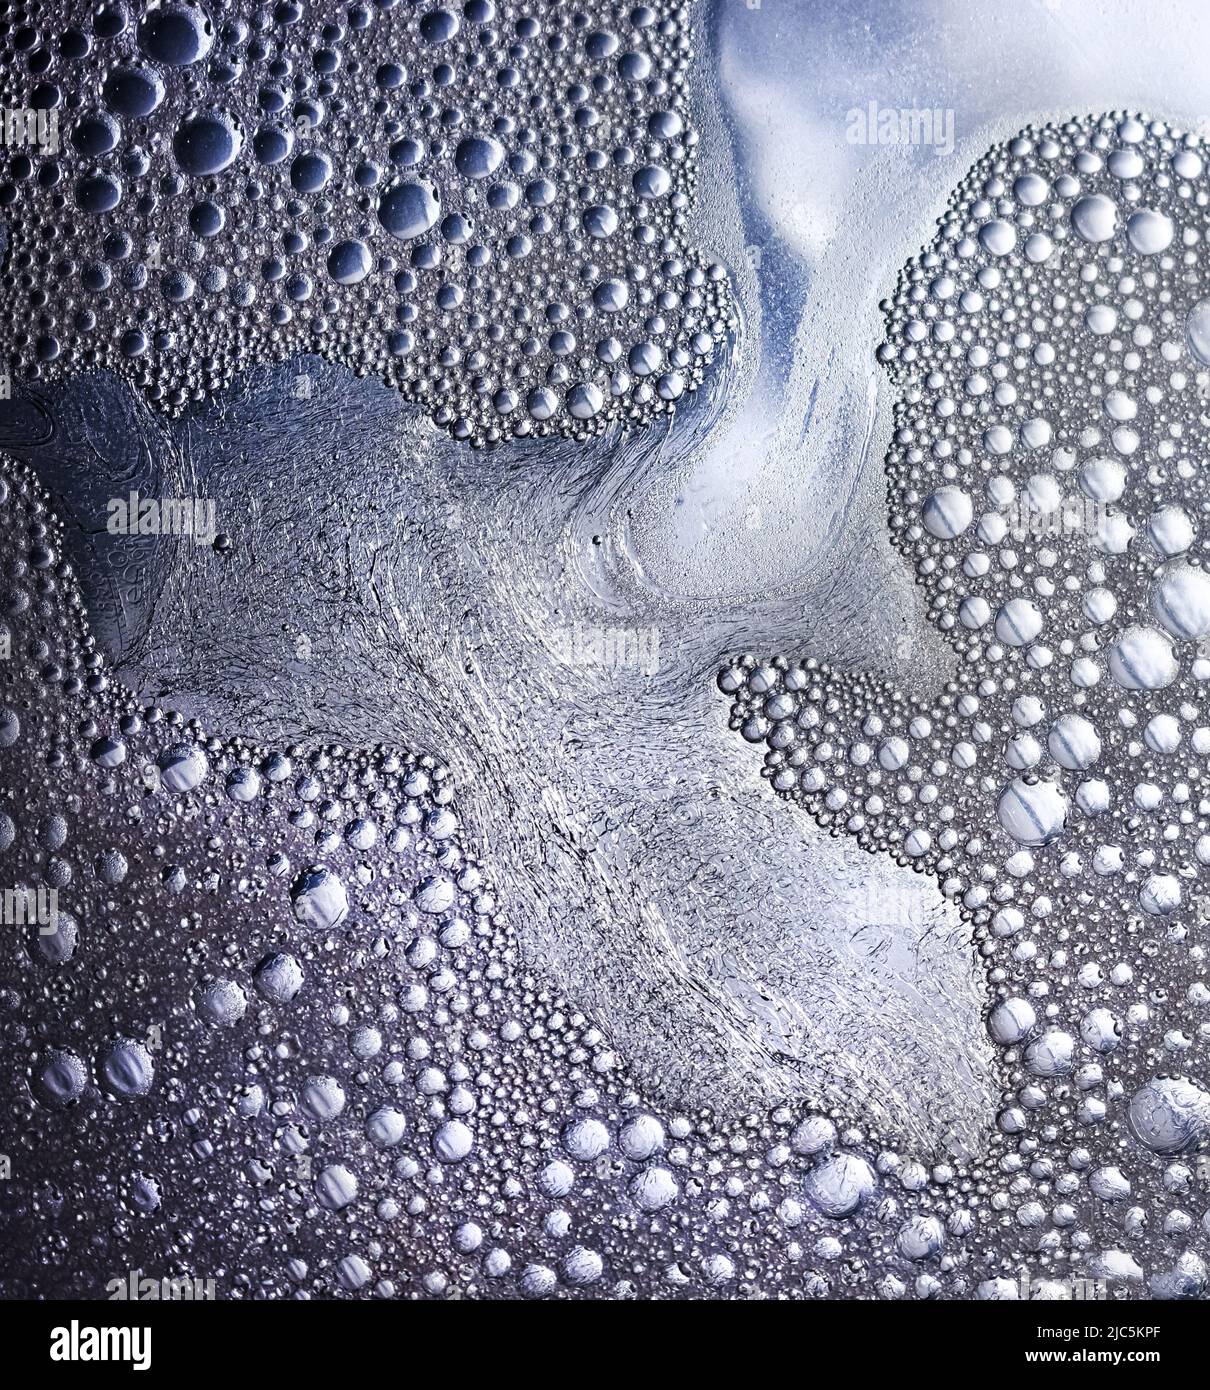 Bubbles made from water, dish liquid, oil, and food coloring creating a other worldly bubble landscape effect Stock Photo